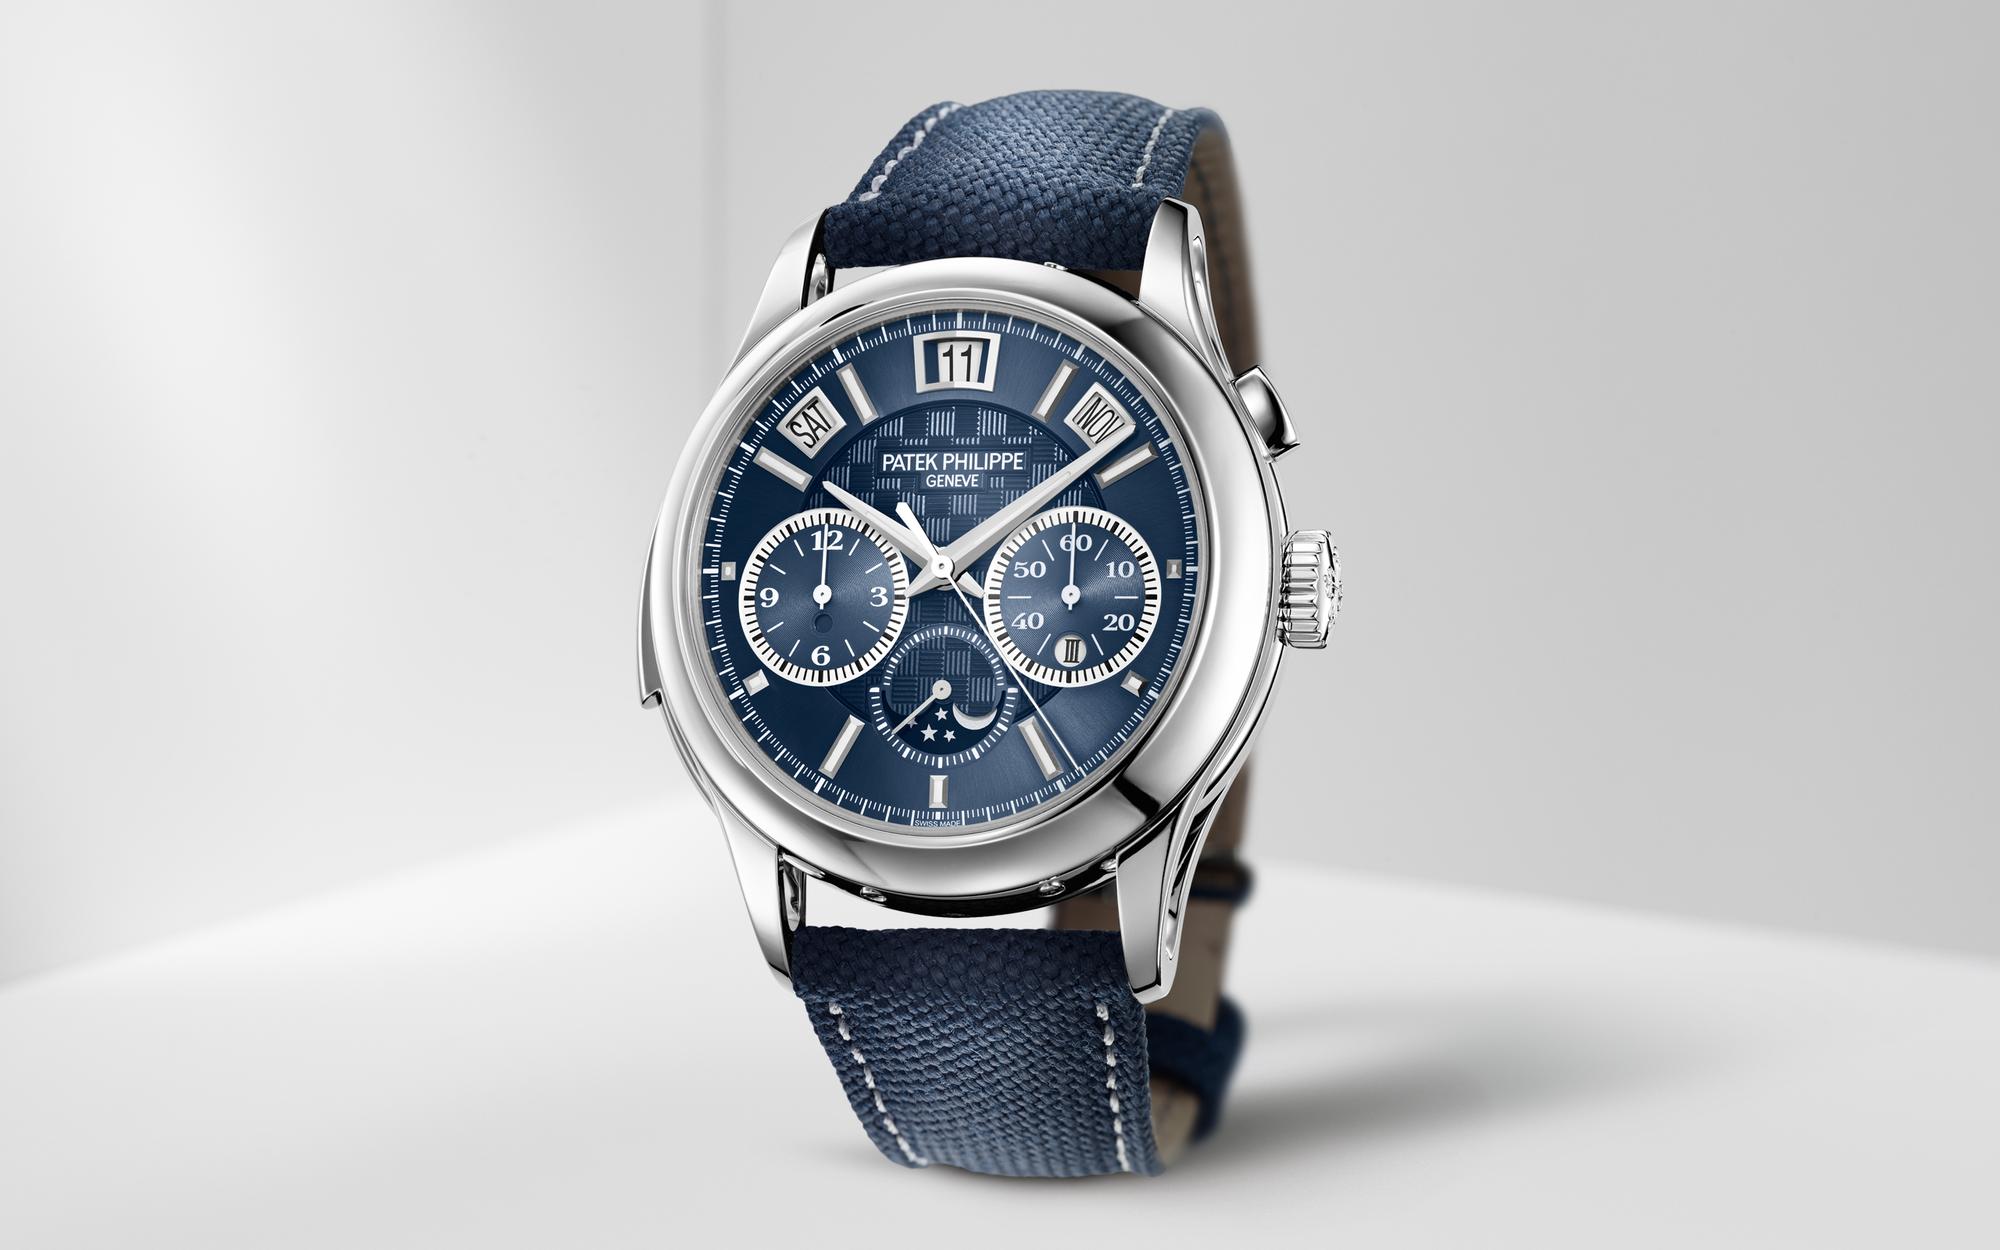 Patek Philippe Patek Philippe Complication World Time Chronograph 5930G-010 Blue Dial New Watch Men's WatchPatek Philippe EWIGER KALENDER - 18ct GOLD - NEW OLD STOCK